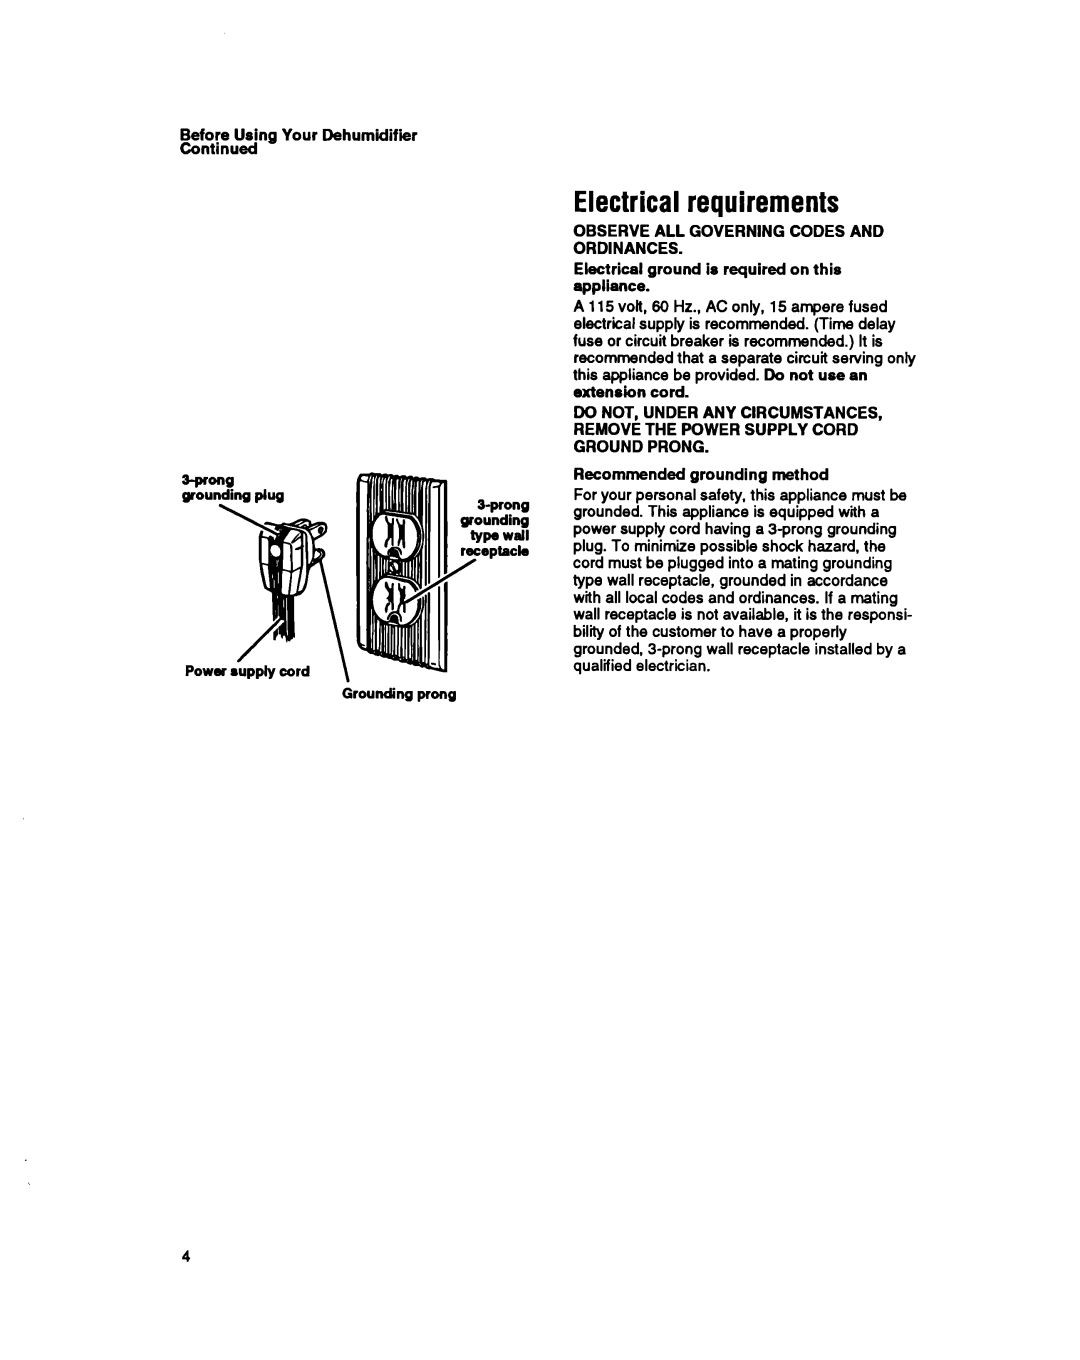 Whirlpool BHDH2500FS0 manual Electrical requirements 